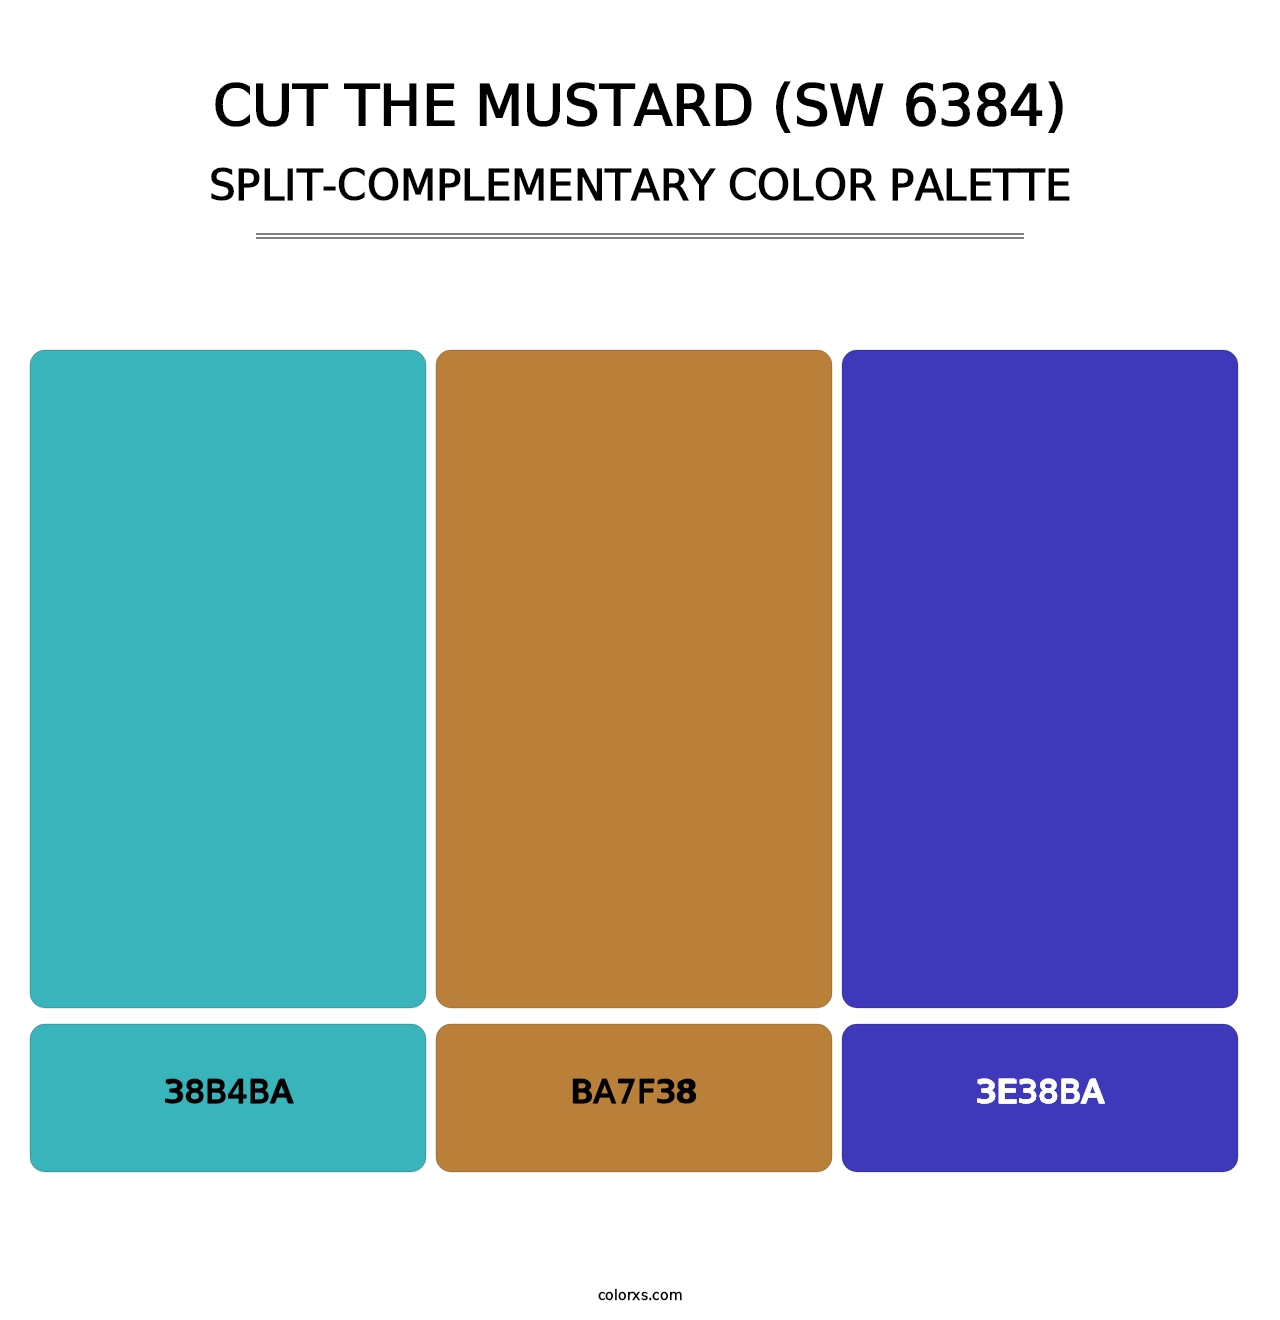 Cut the Mustard (SW 6384) - Split-Complementary Color Palette